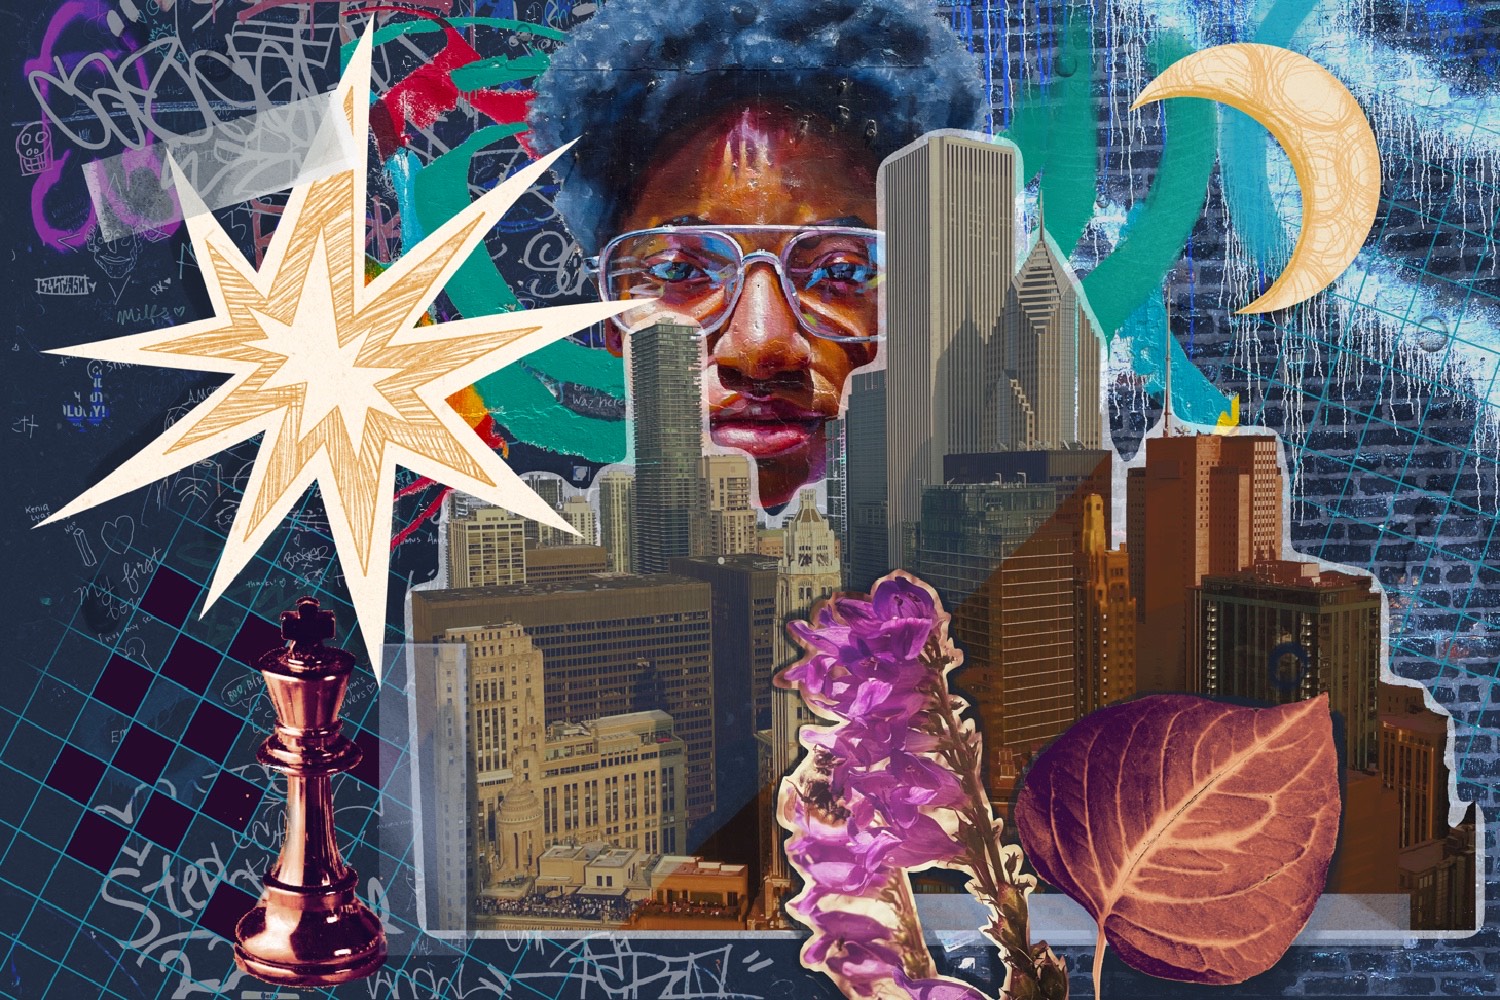 Image: A collage and illustration by Julia O'Brien. In the left portion of the image, there's a chess piece underneath a yellow and white burst. To the right of these there's a paper cutout of a skyline with a leaf and flower in front of it. Above the skyline's right side is a crescent moon. From behind the buildings, a massive face wearing glasses looks through at the audience. There's a textured blue wash backdrop. Illustration by Julia O'Brien.